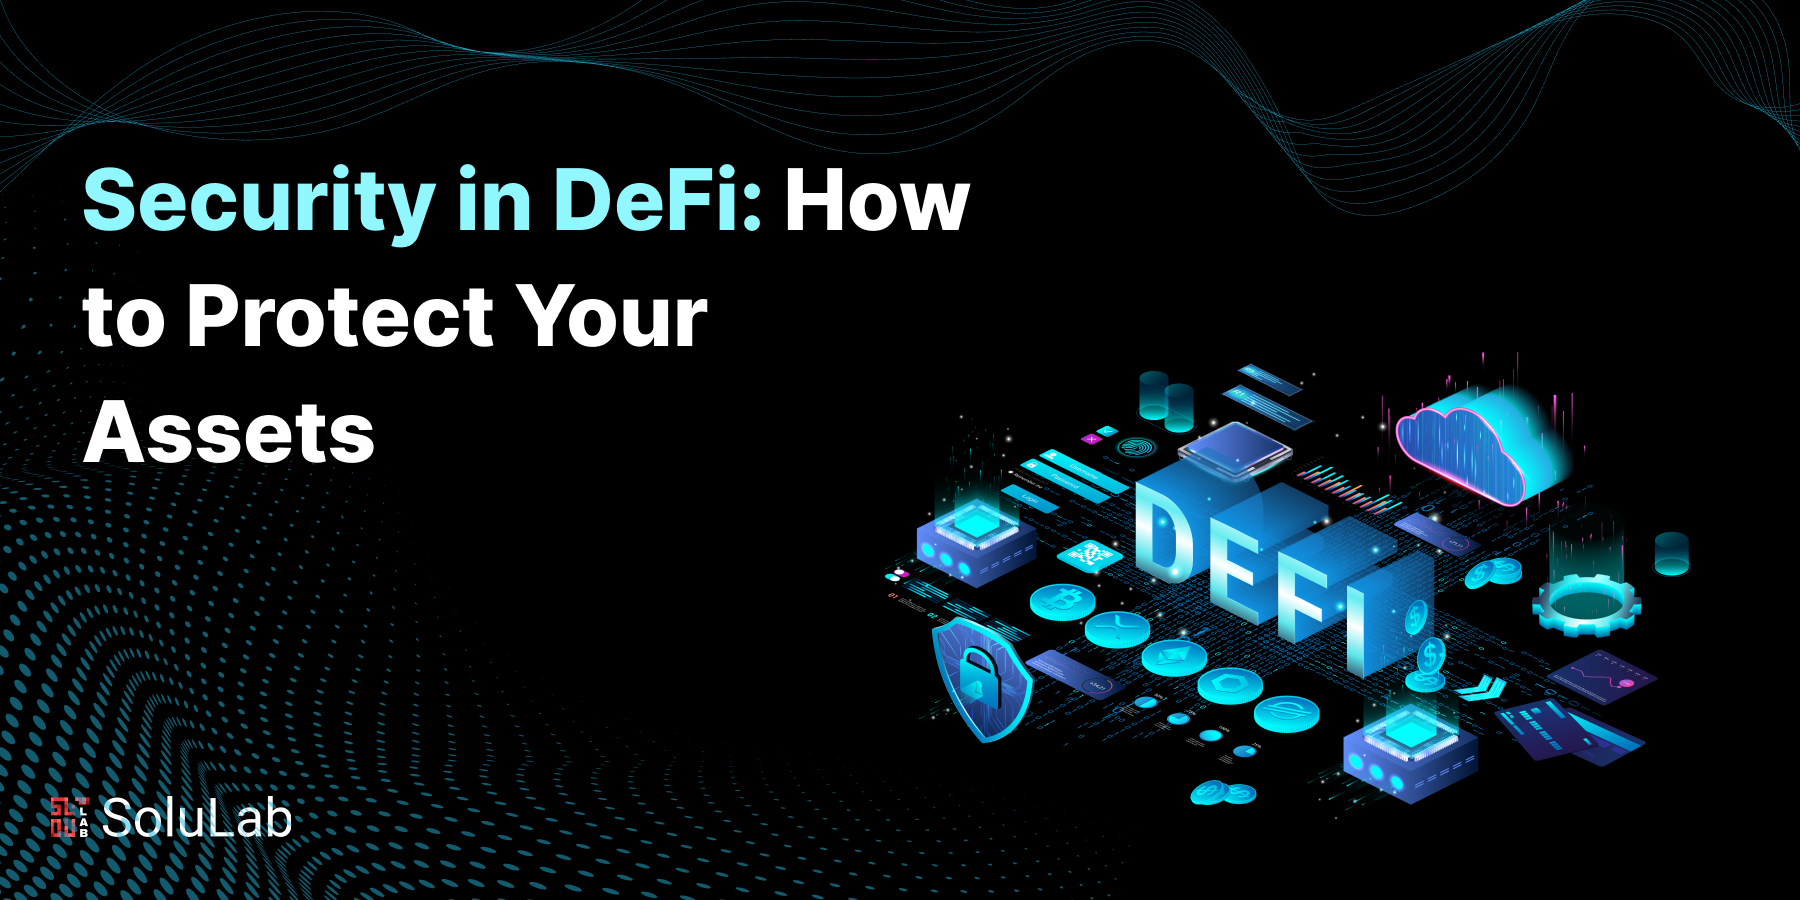 Security in DeFi: How to Protect Your Assets